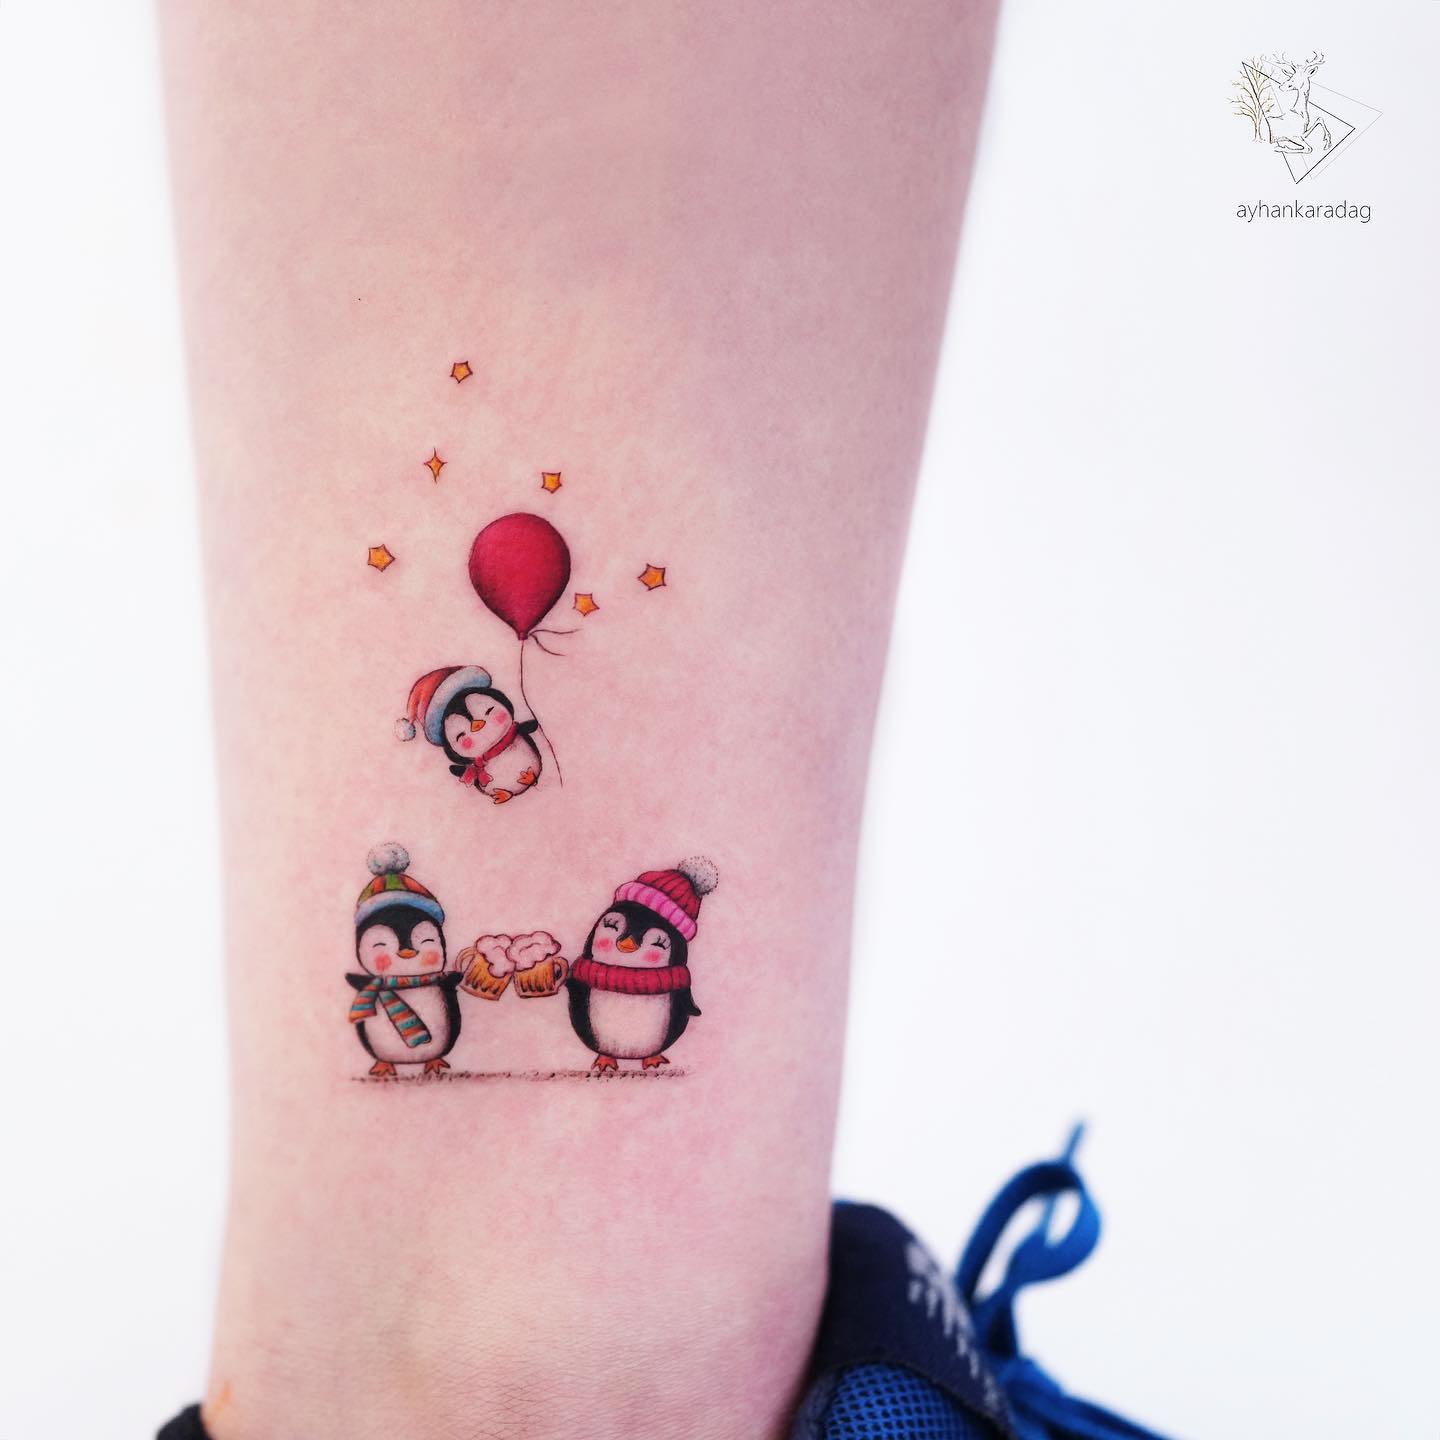 If there is something cuter than a little penguin, it is three little penguins. Every time you look at your tattoo design, it will make your heart warm.